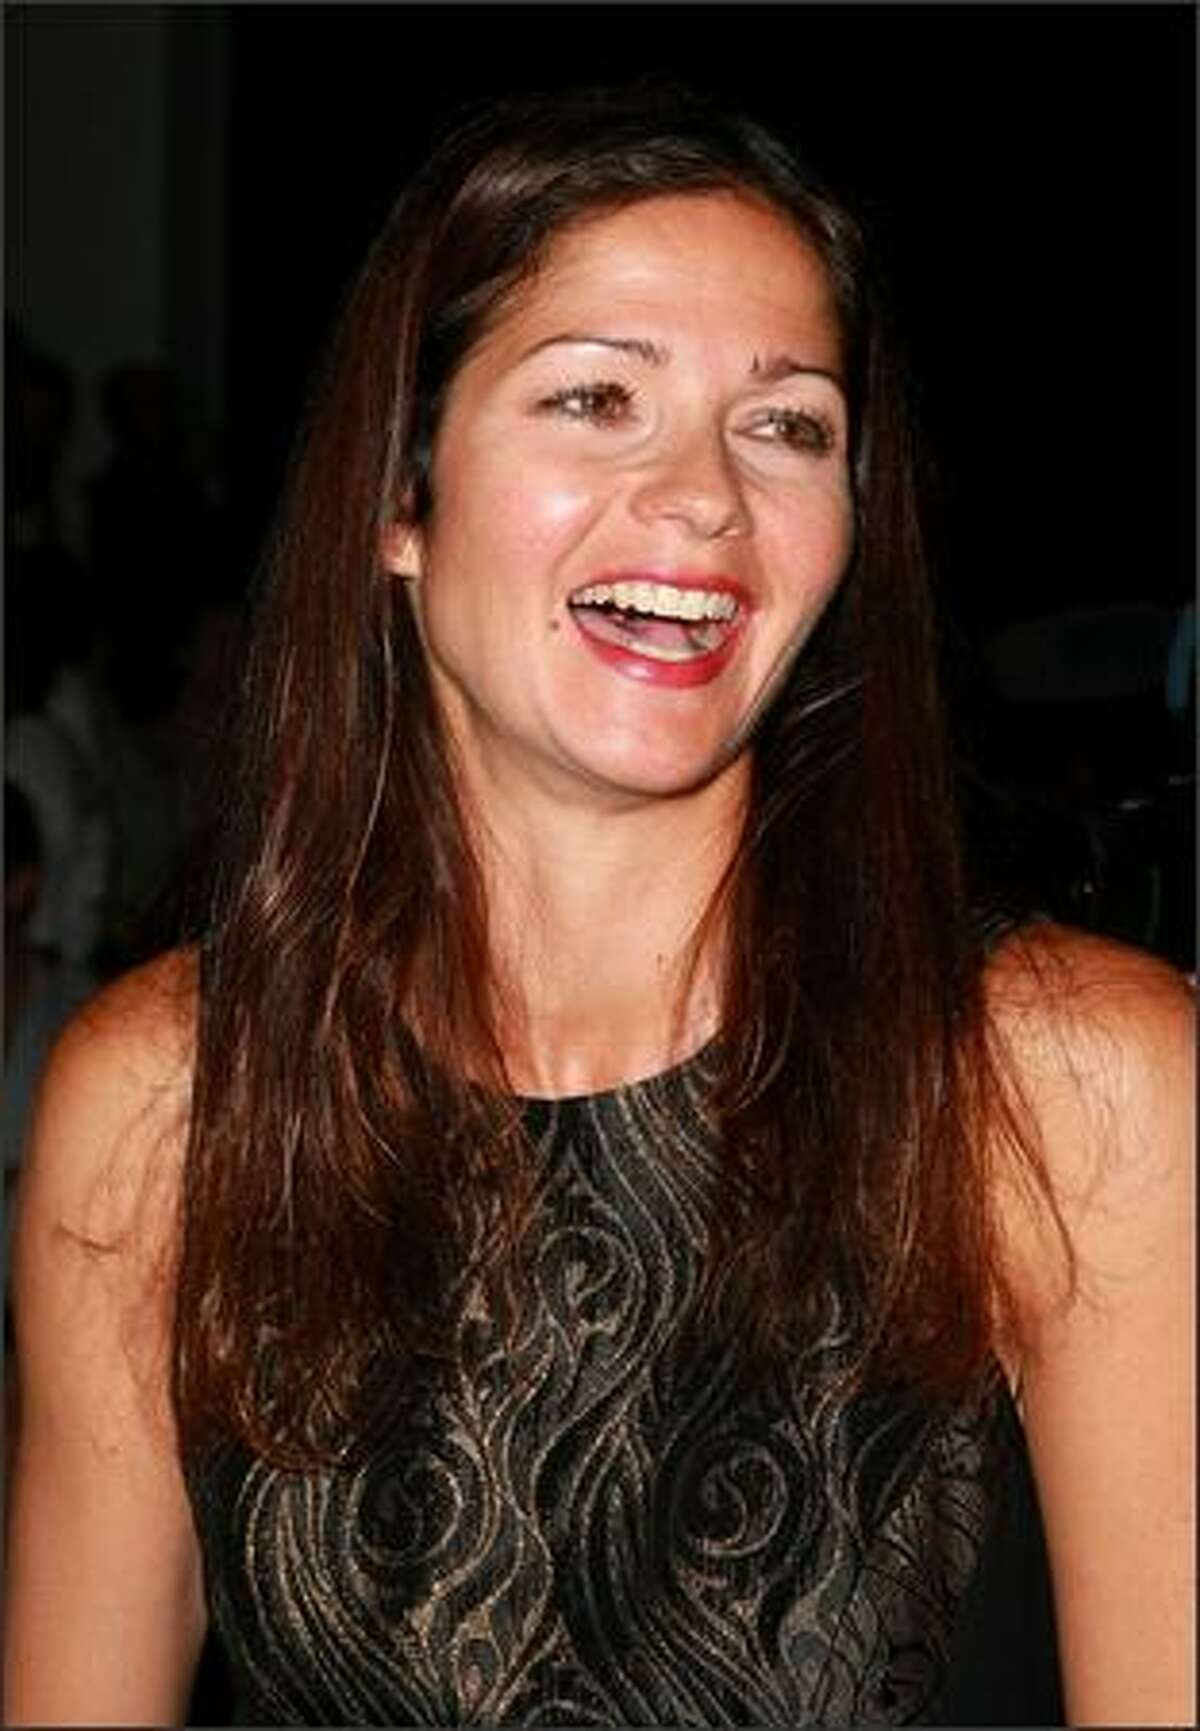 Actress Jill Hennessy attends the Nicole Miller show.